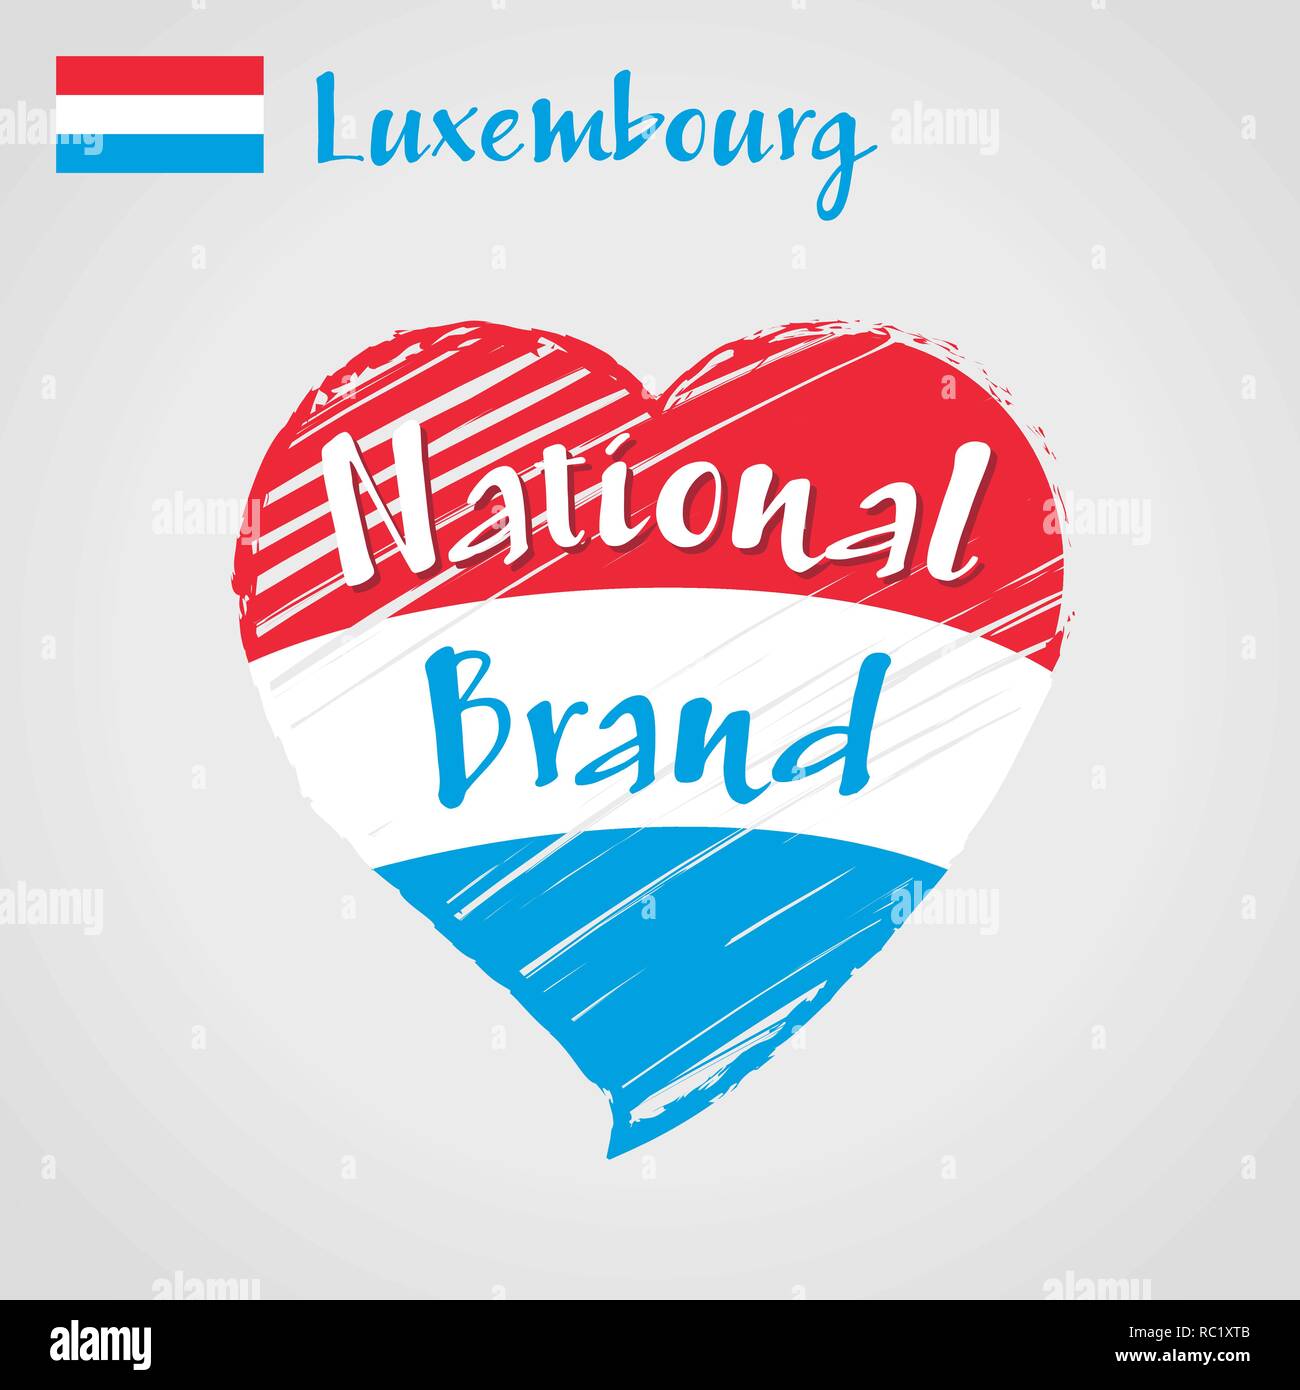 Vector flag heart of Luxembourg, National Brand. Stock Vector